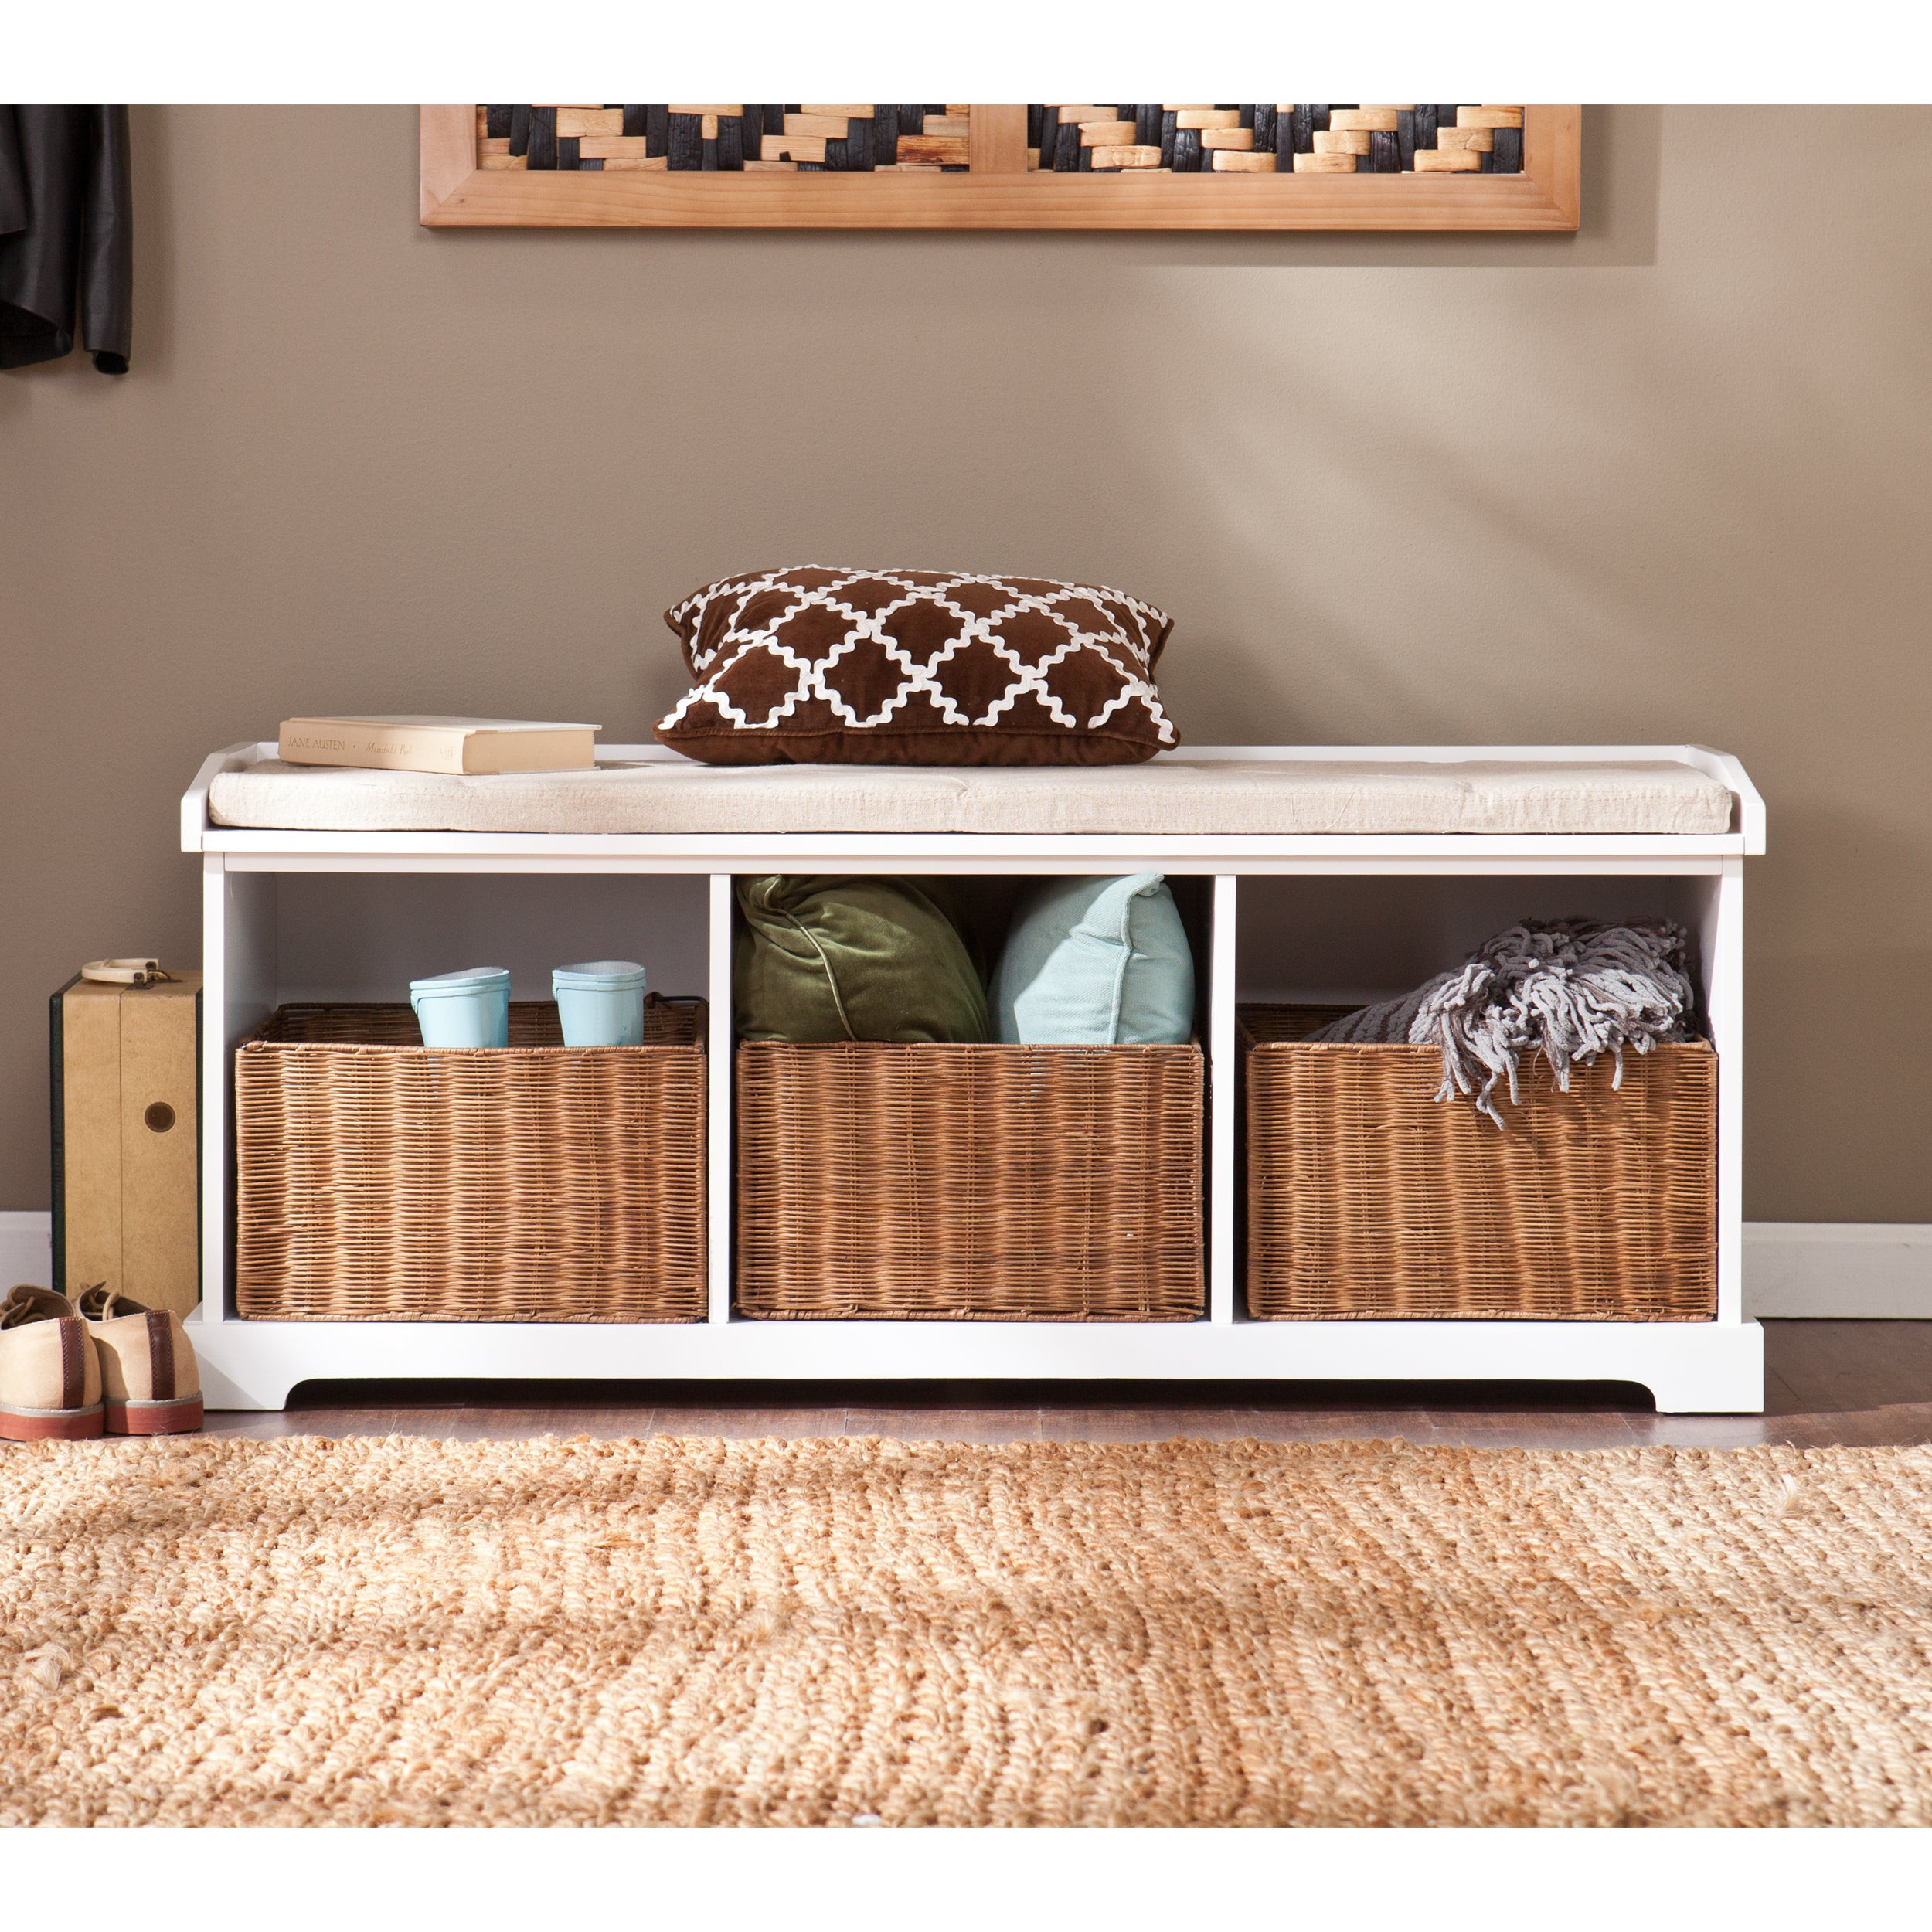 White Entryway Storage Benches
 Havenside Home Beaumont White Entryway Storage Bench